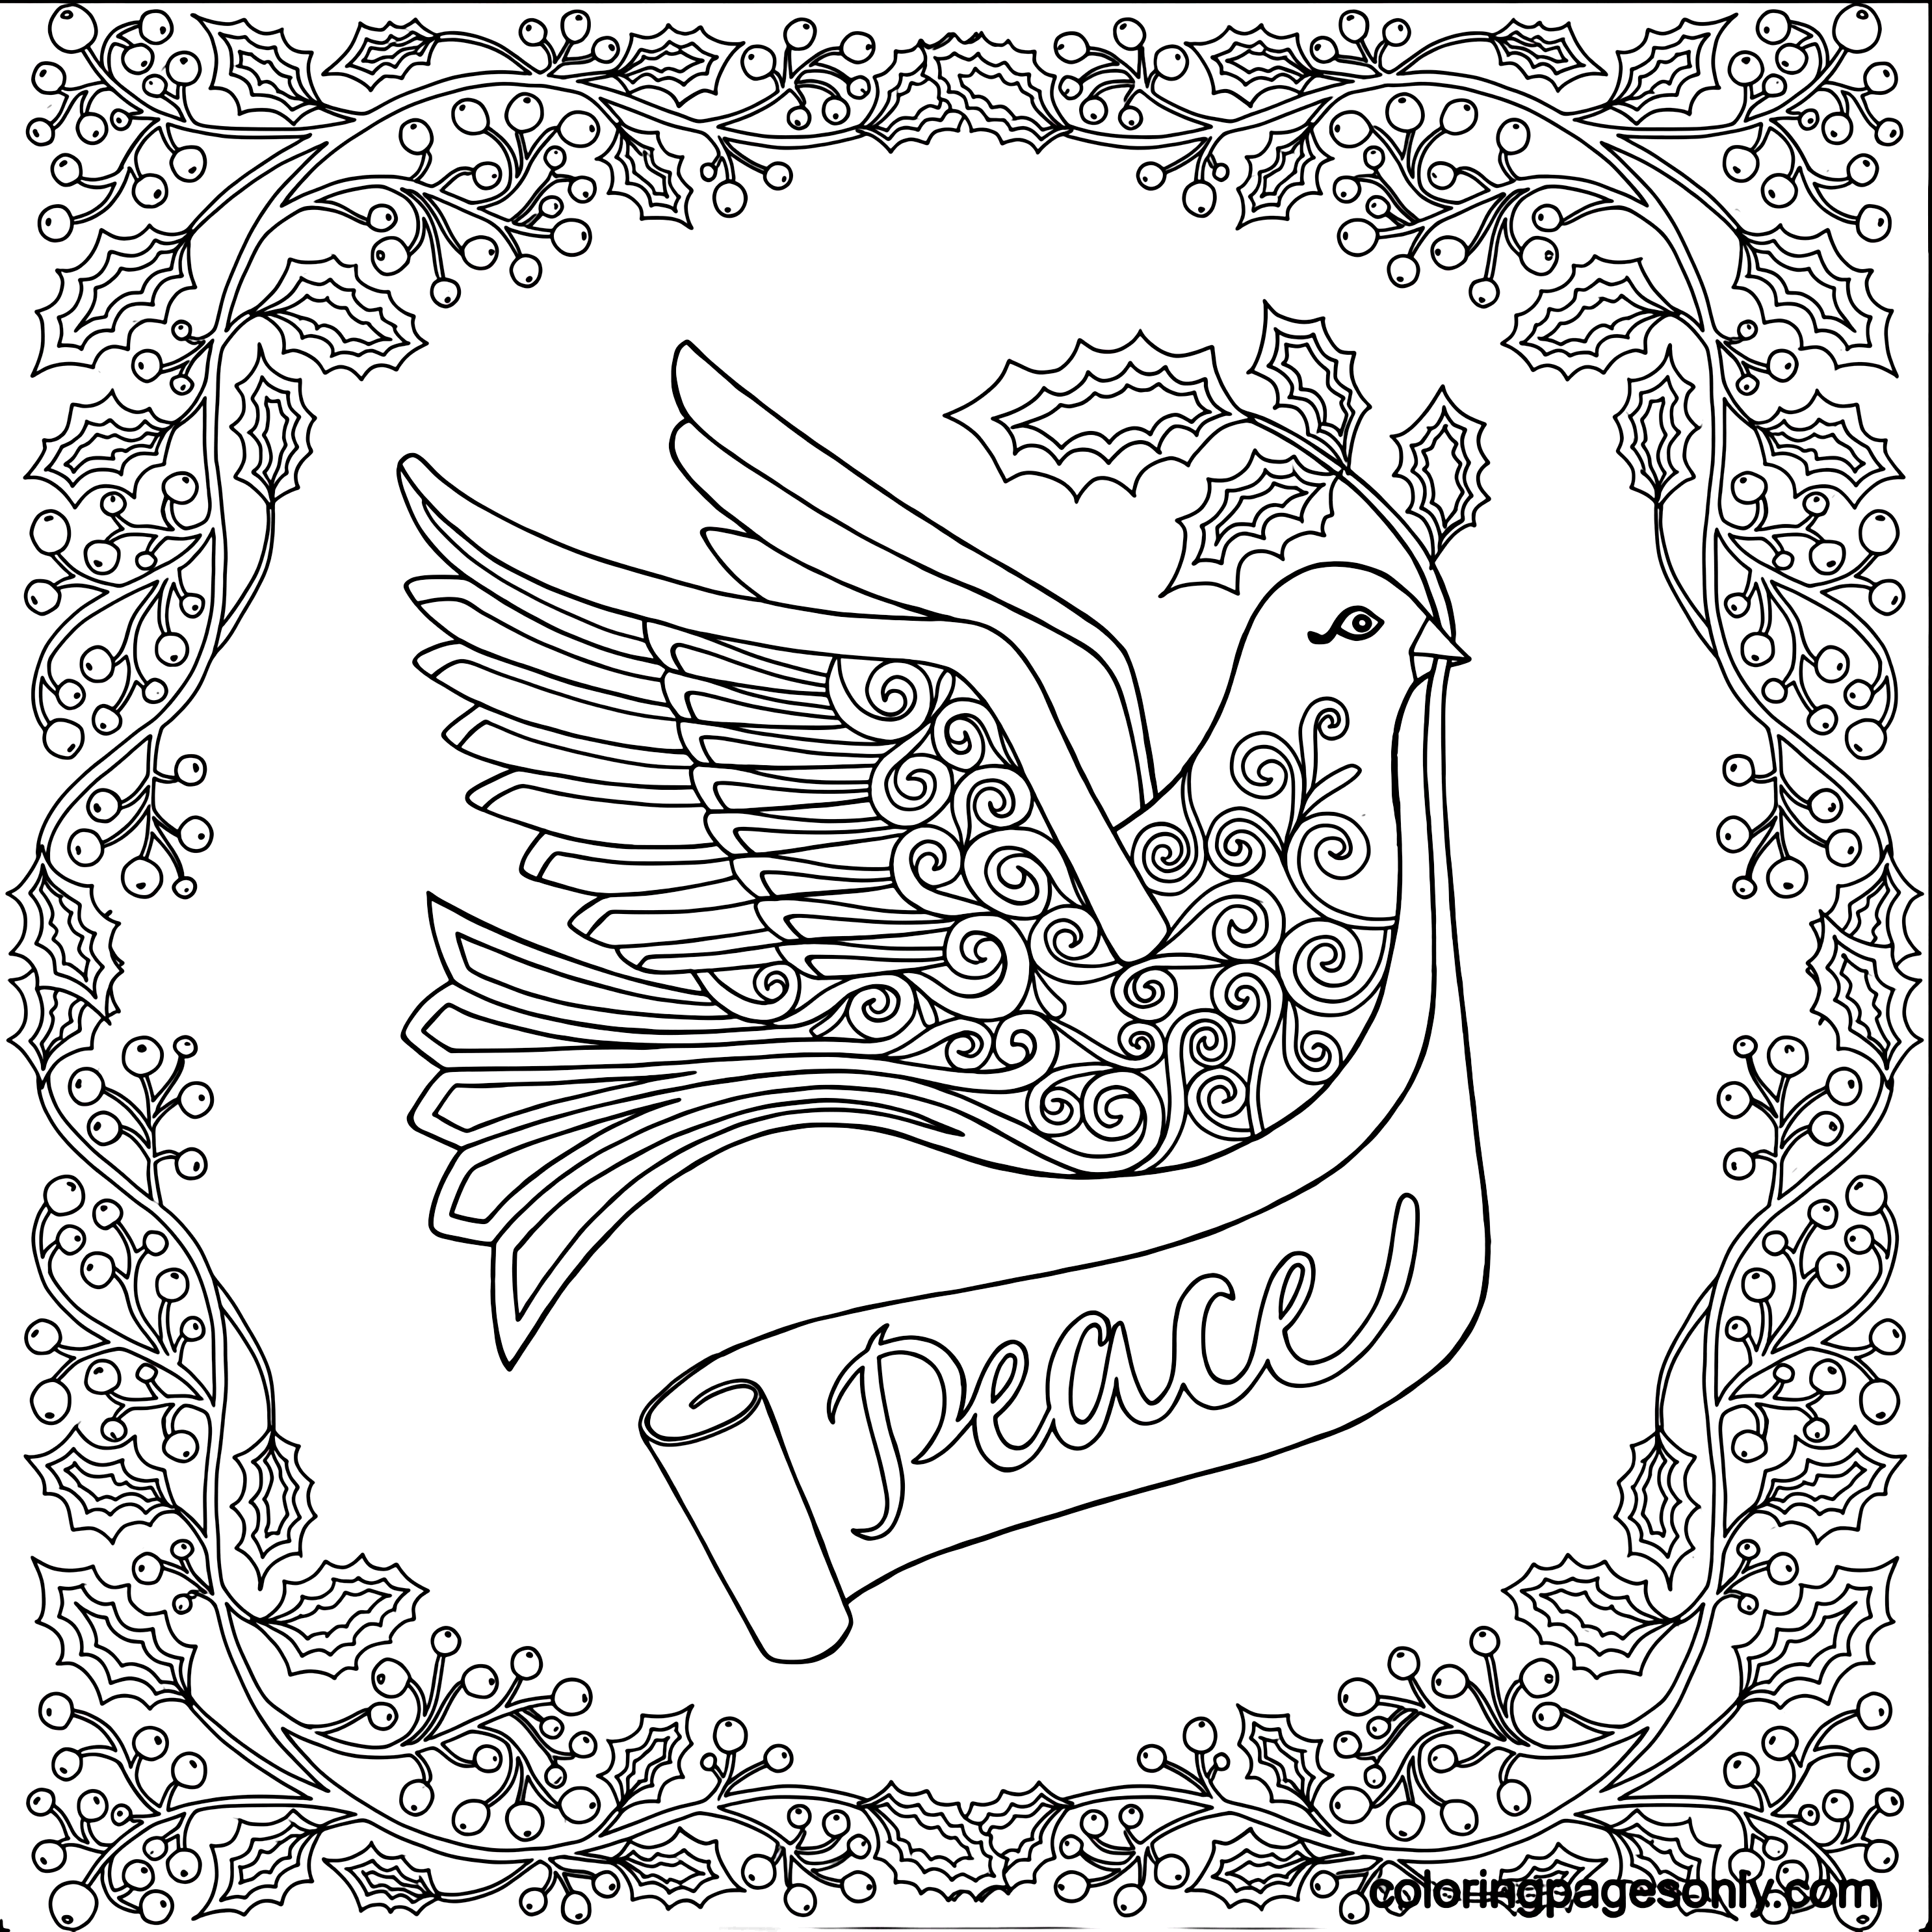 Dove Peace Coloring Page